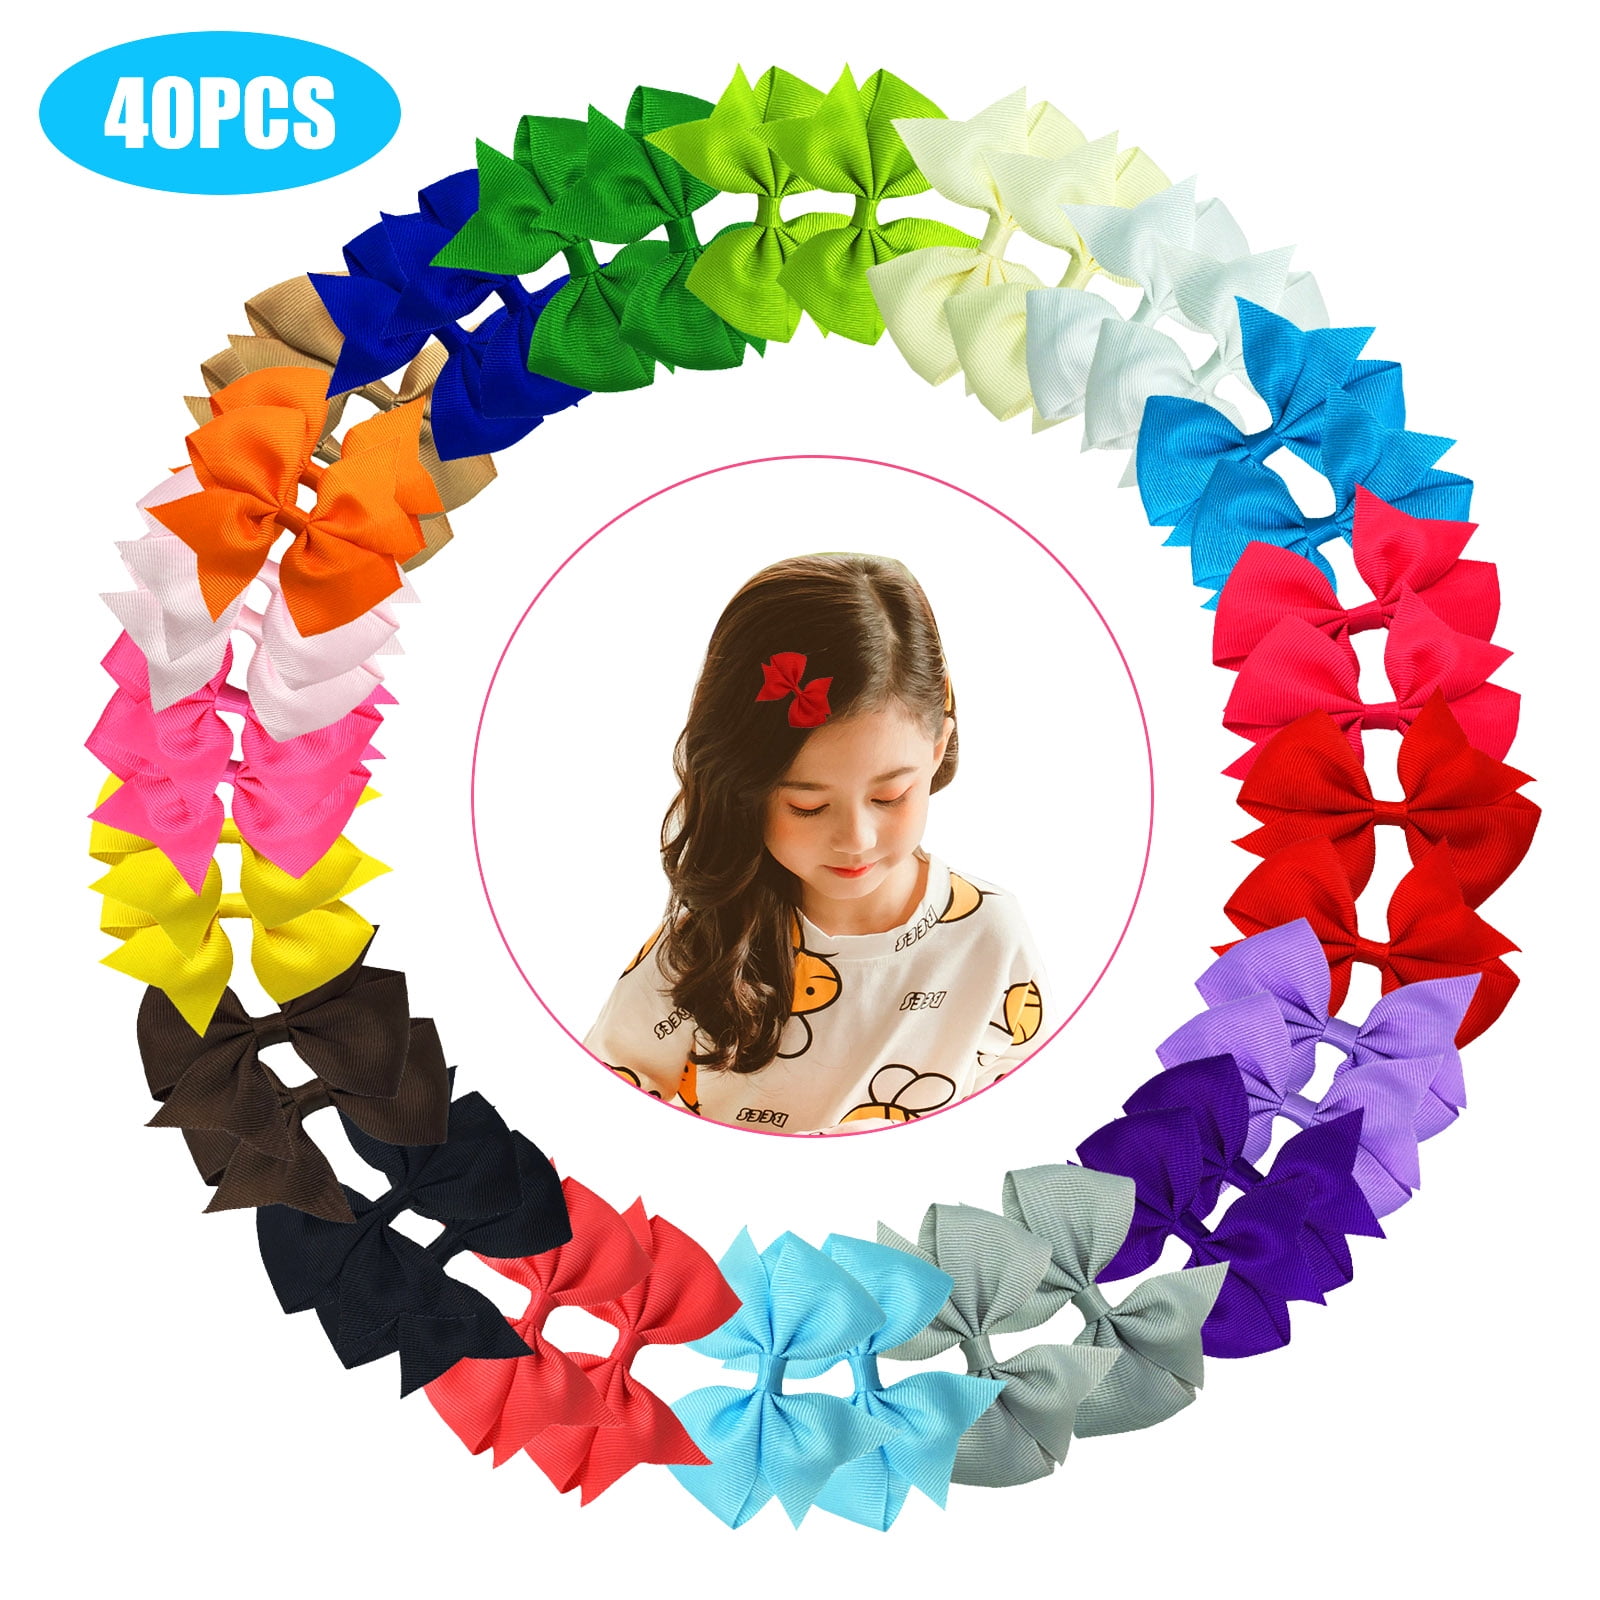 40pcs 2 Chiffon Flower Clips Ribbon Lined Clips Tiny Hair Clips for Baby Girls Infants Toddlers Kids 20 Colors in Pairs